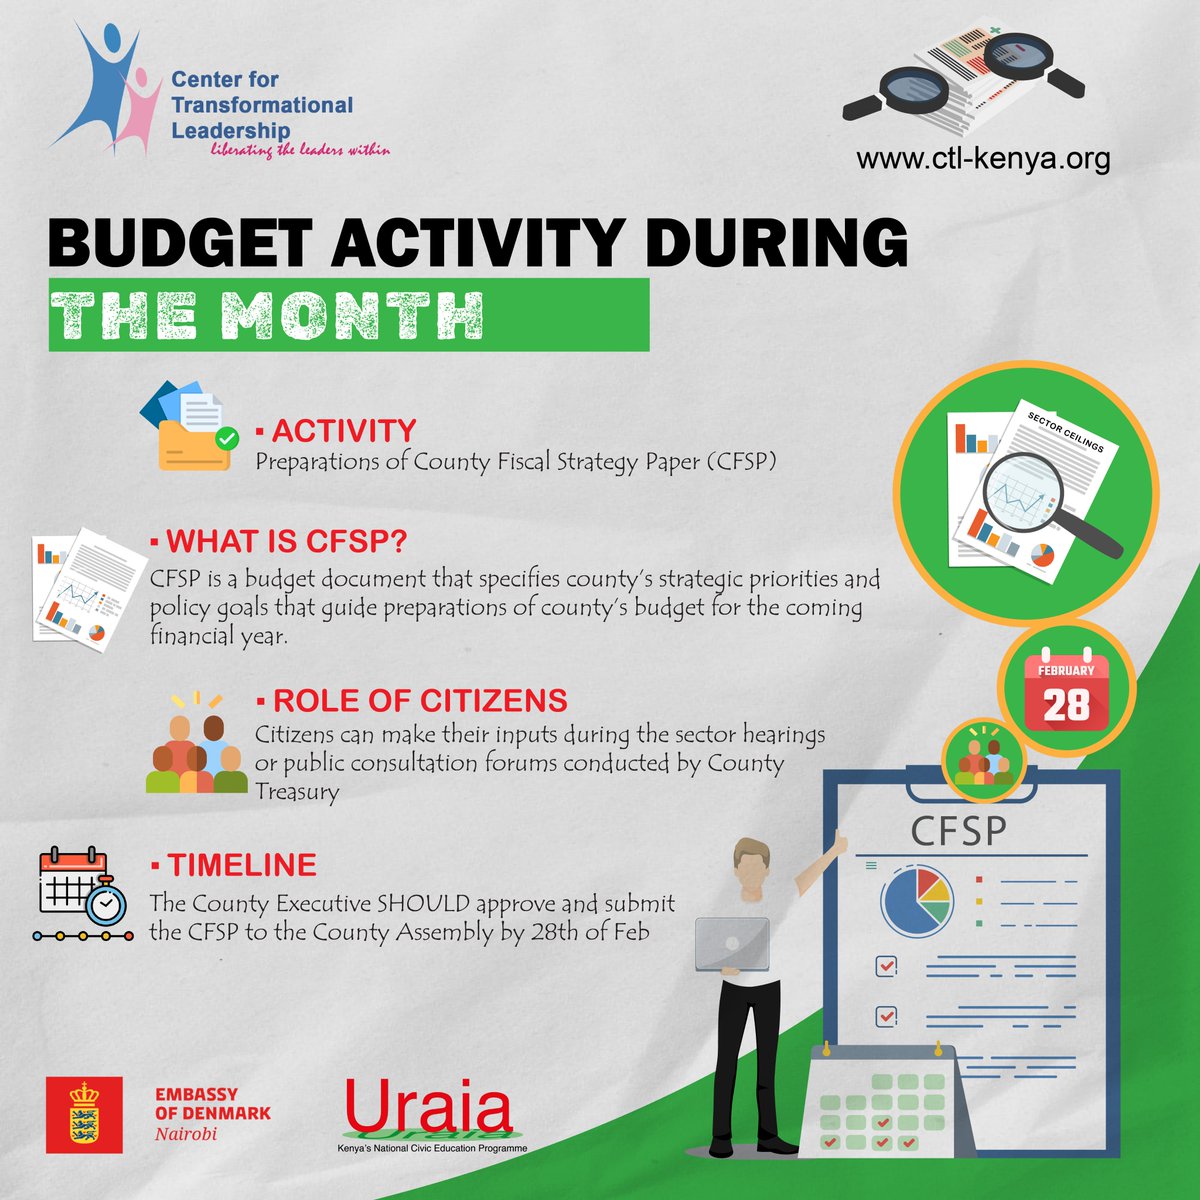 Hello there, It's a new month and as always we'd like to ensure you are well-informed about the budget activities lined up for the month in our counties. Start preparing and get involved! @UraiaTrust @denmarkinkenya